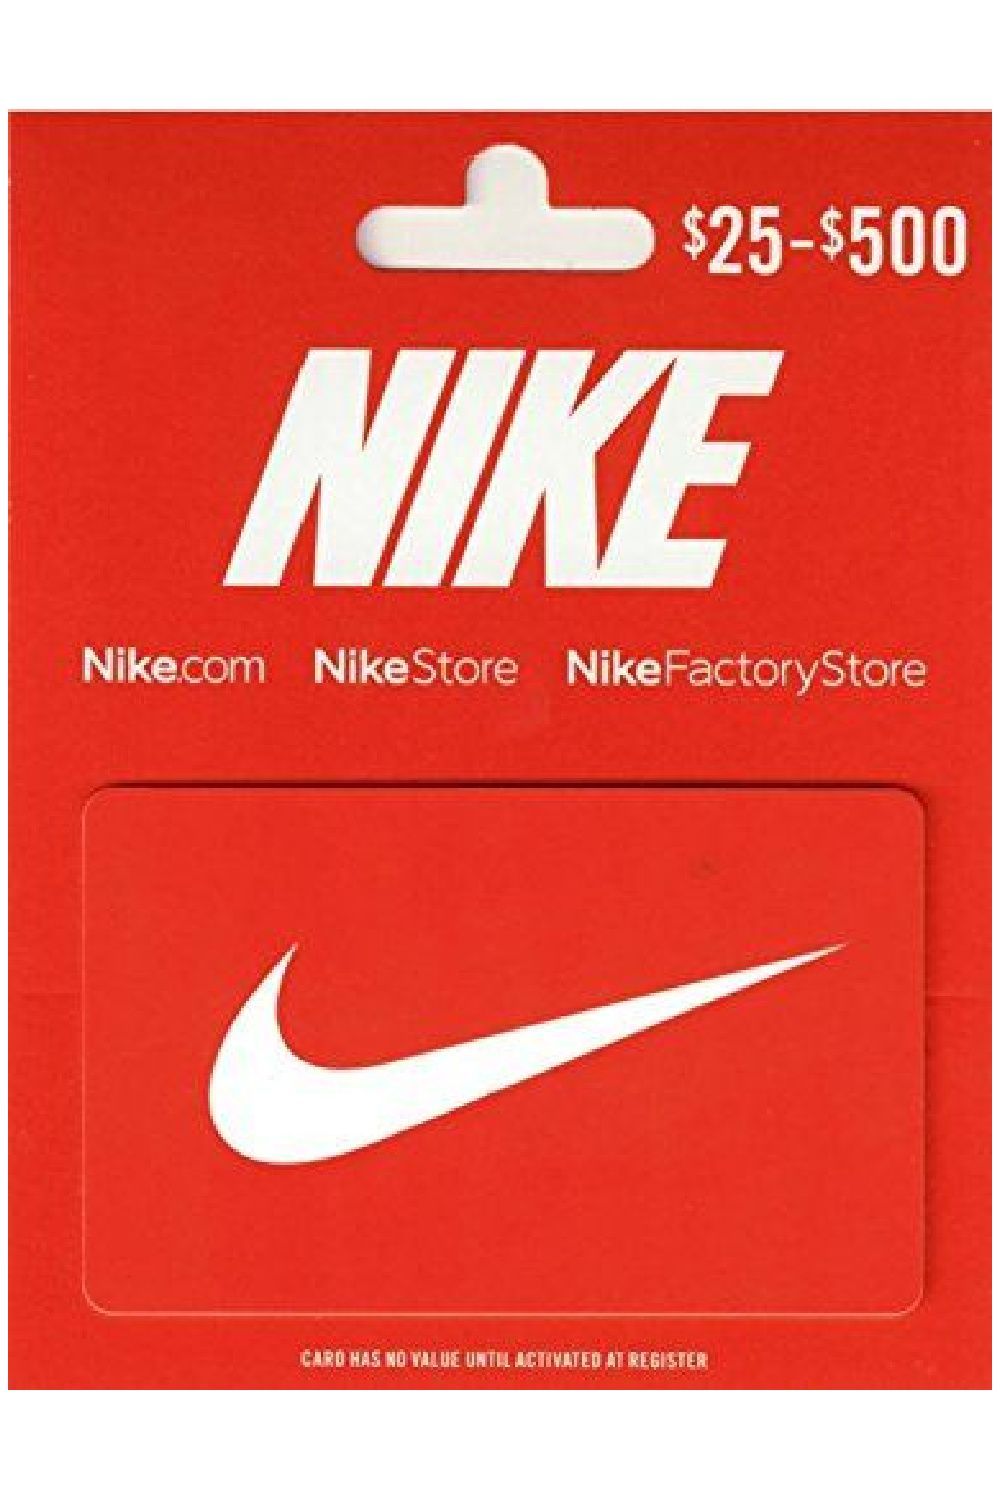 where can i spend my nike gift card